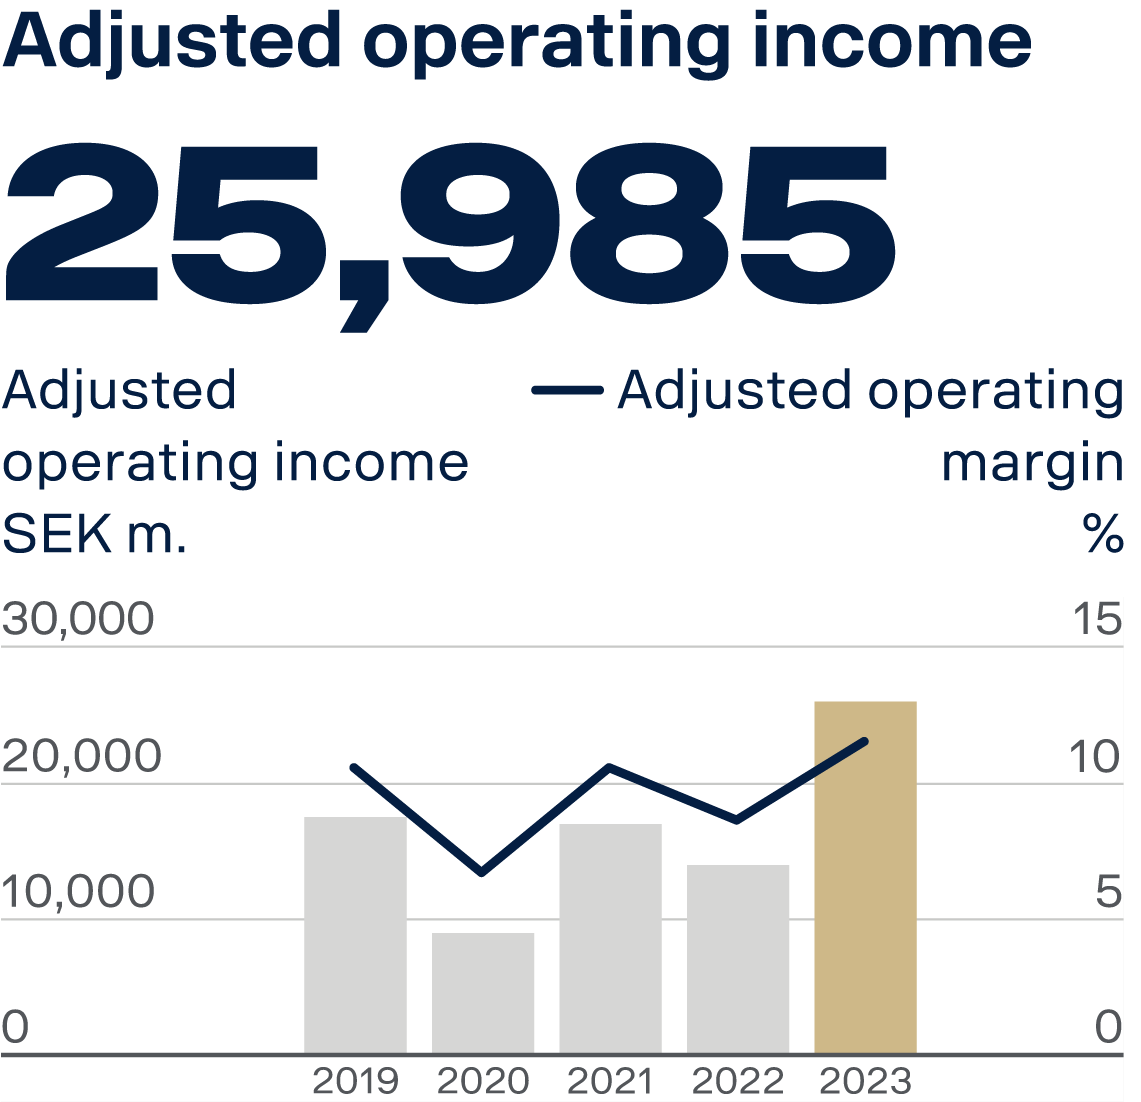 Scania´s Adjusted Operating income